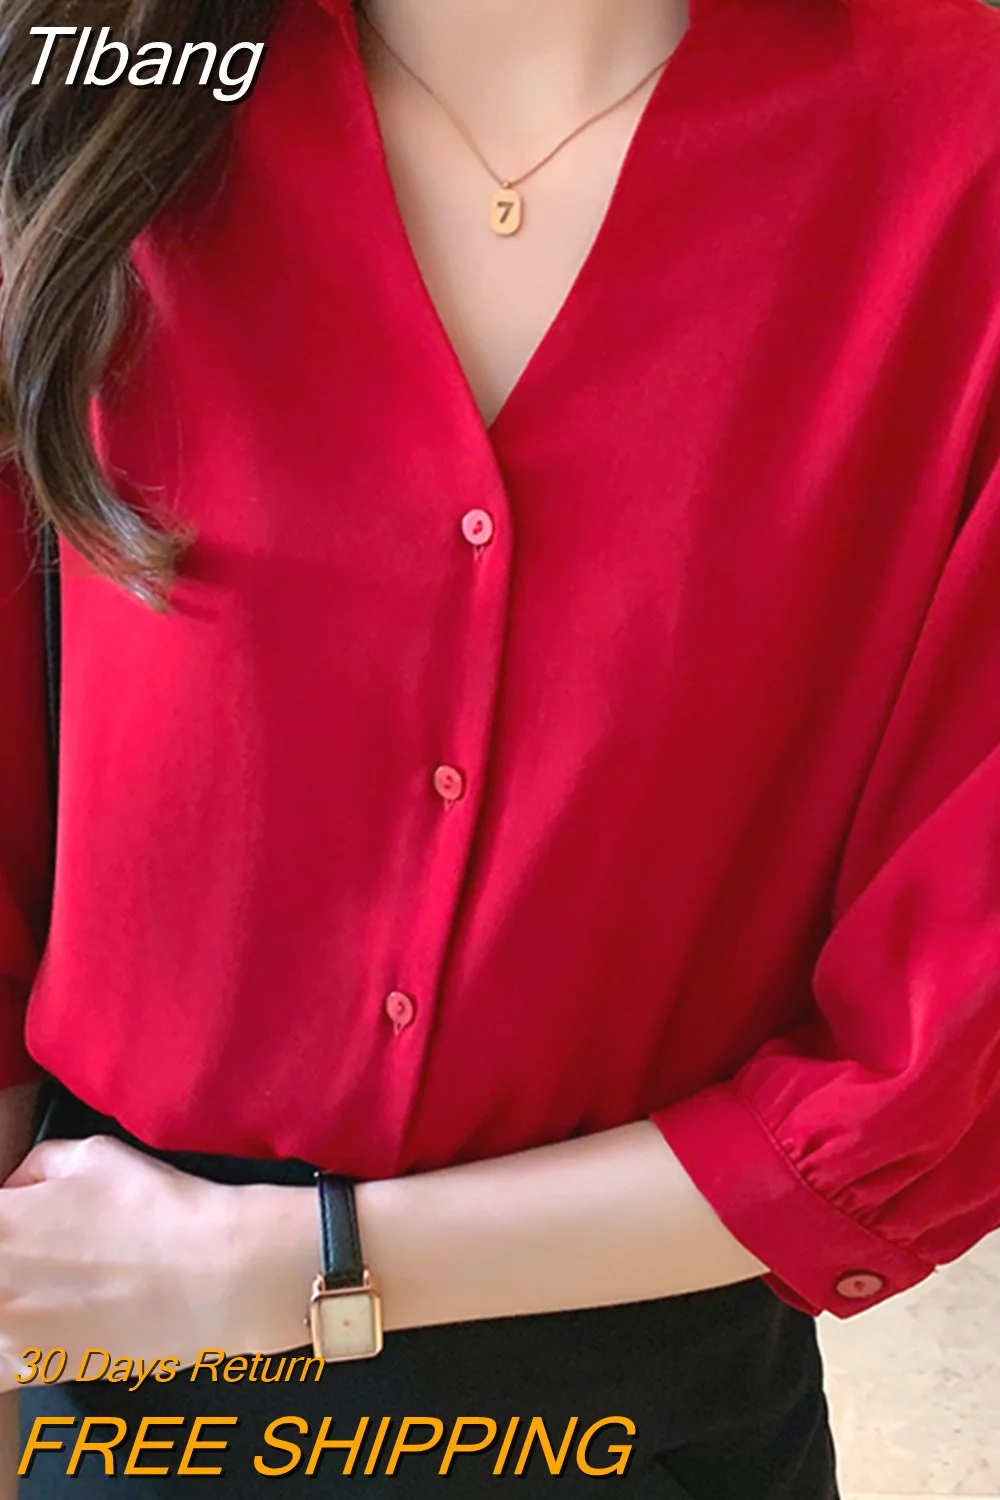 Tlbang Women's Shirt Vintage Red Button Blouses for Women Short Sleeve Shirts Female Top Polo Neck Solid Blouse Office Lady Basic Shirt